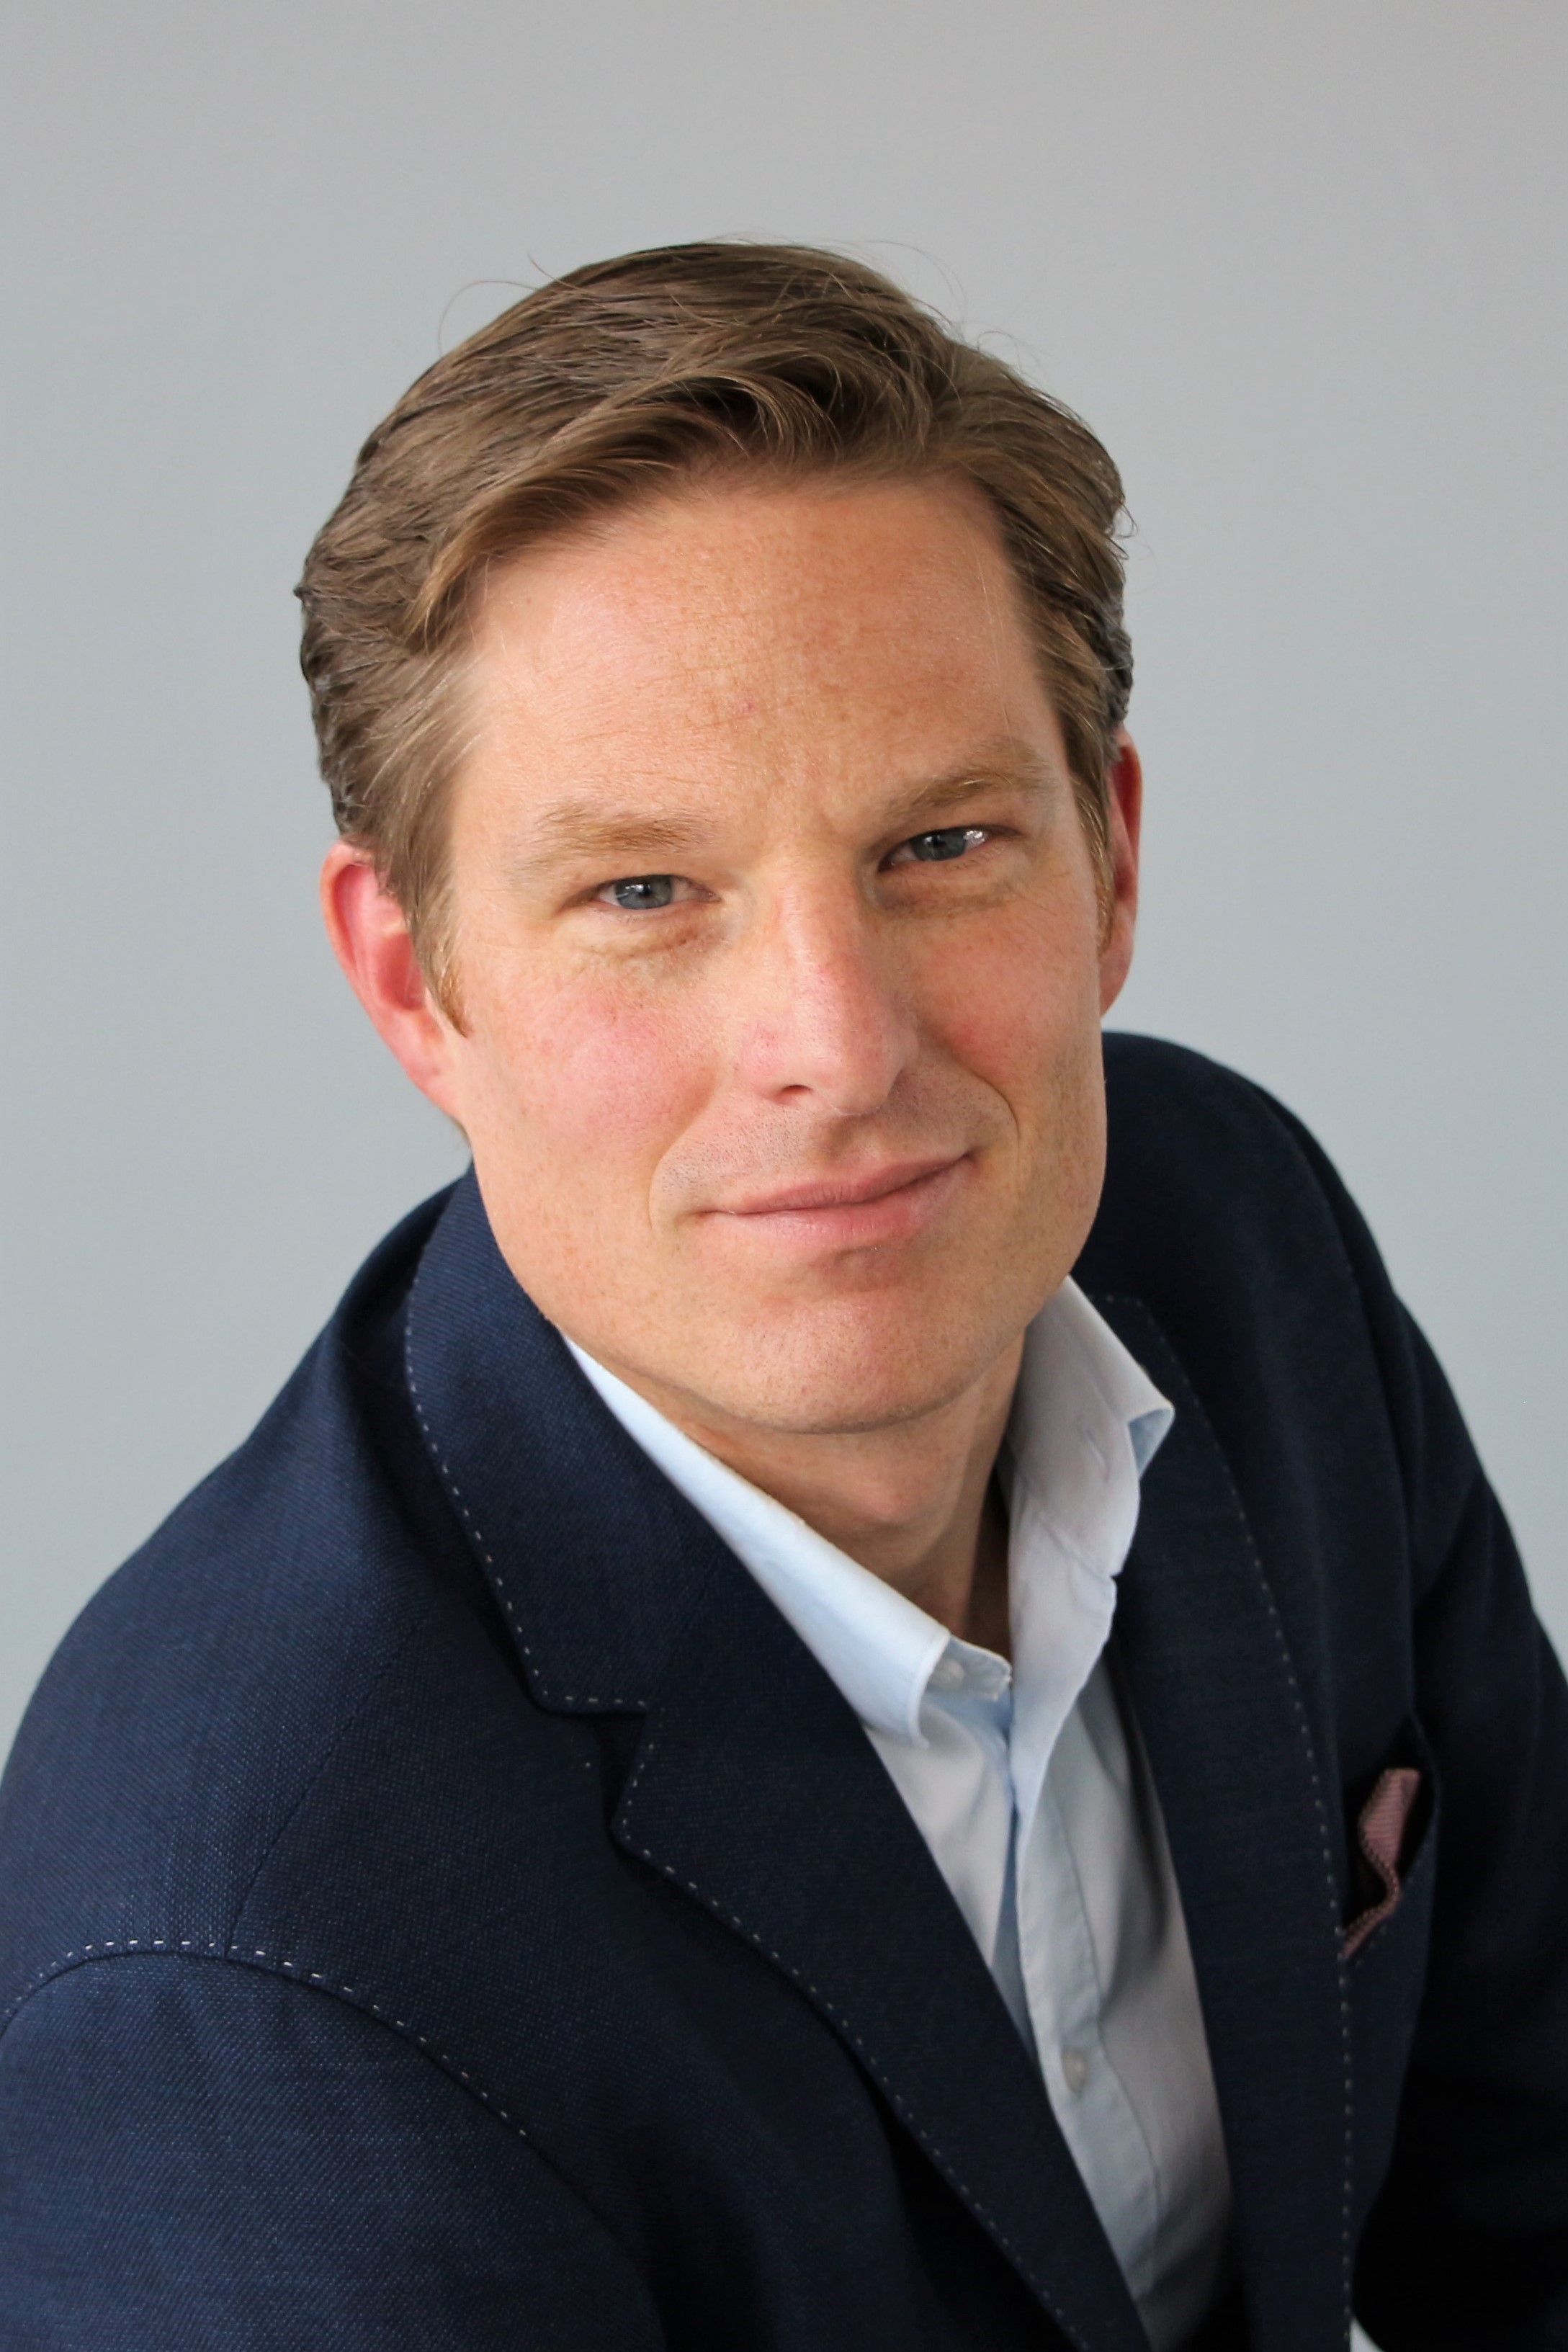 Lars Schubert, Founder and CEO of Ifakt